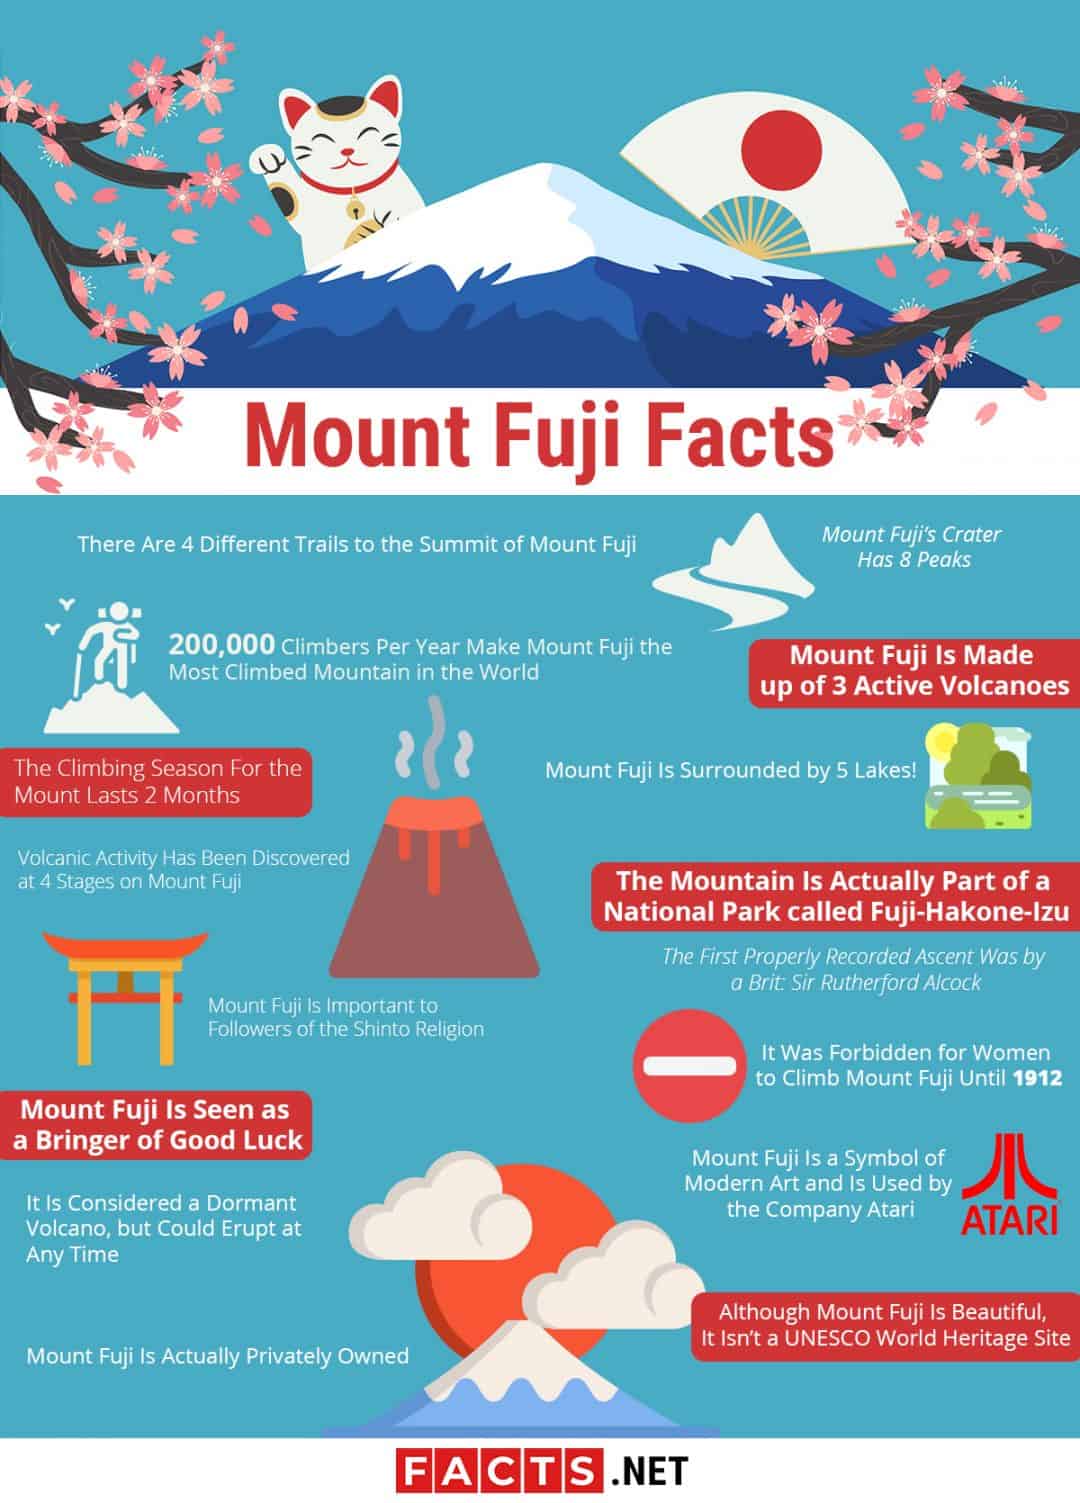 16 Facts about Mount Fuji - History, Climate, Religion & More | Facts.net